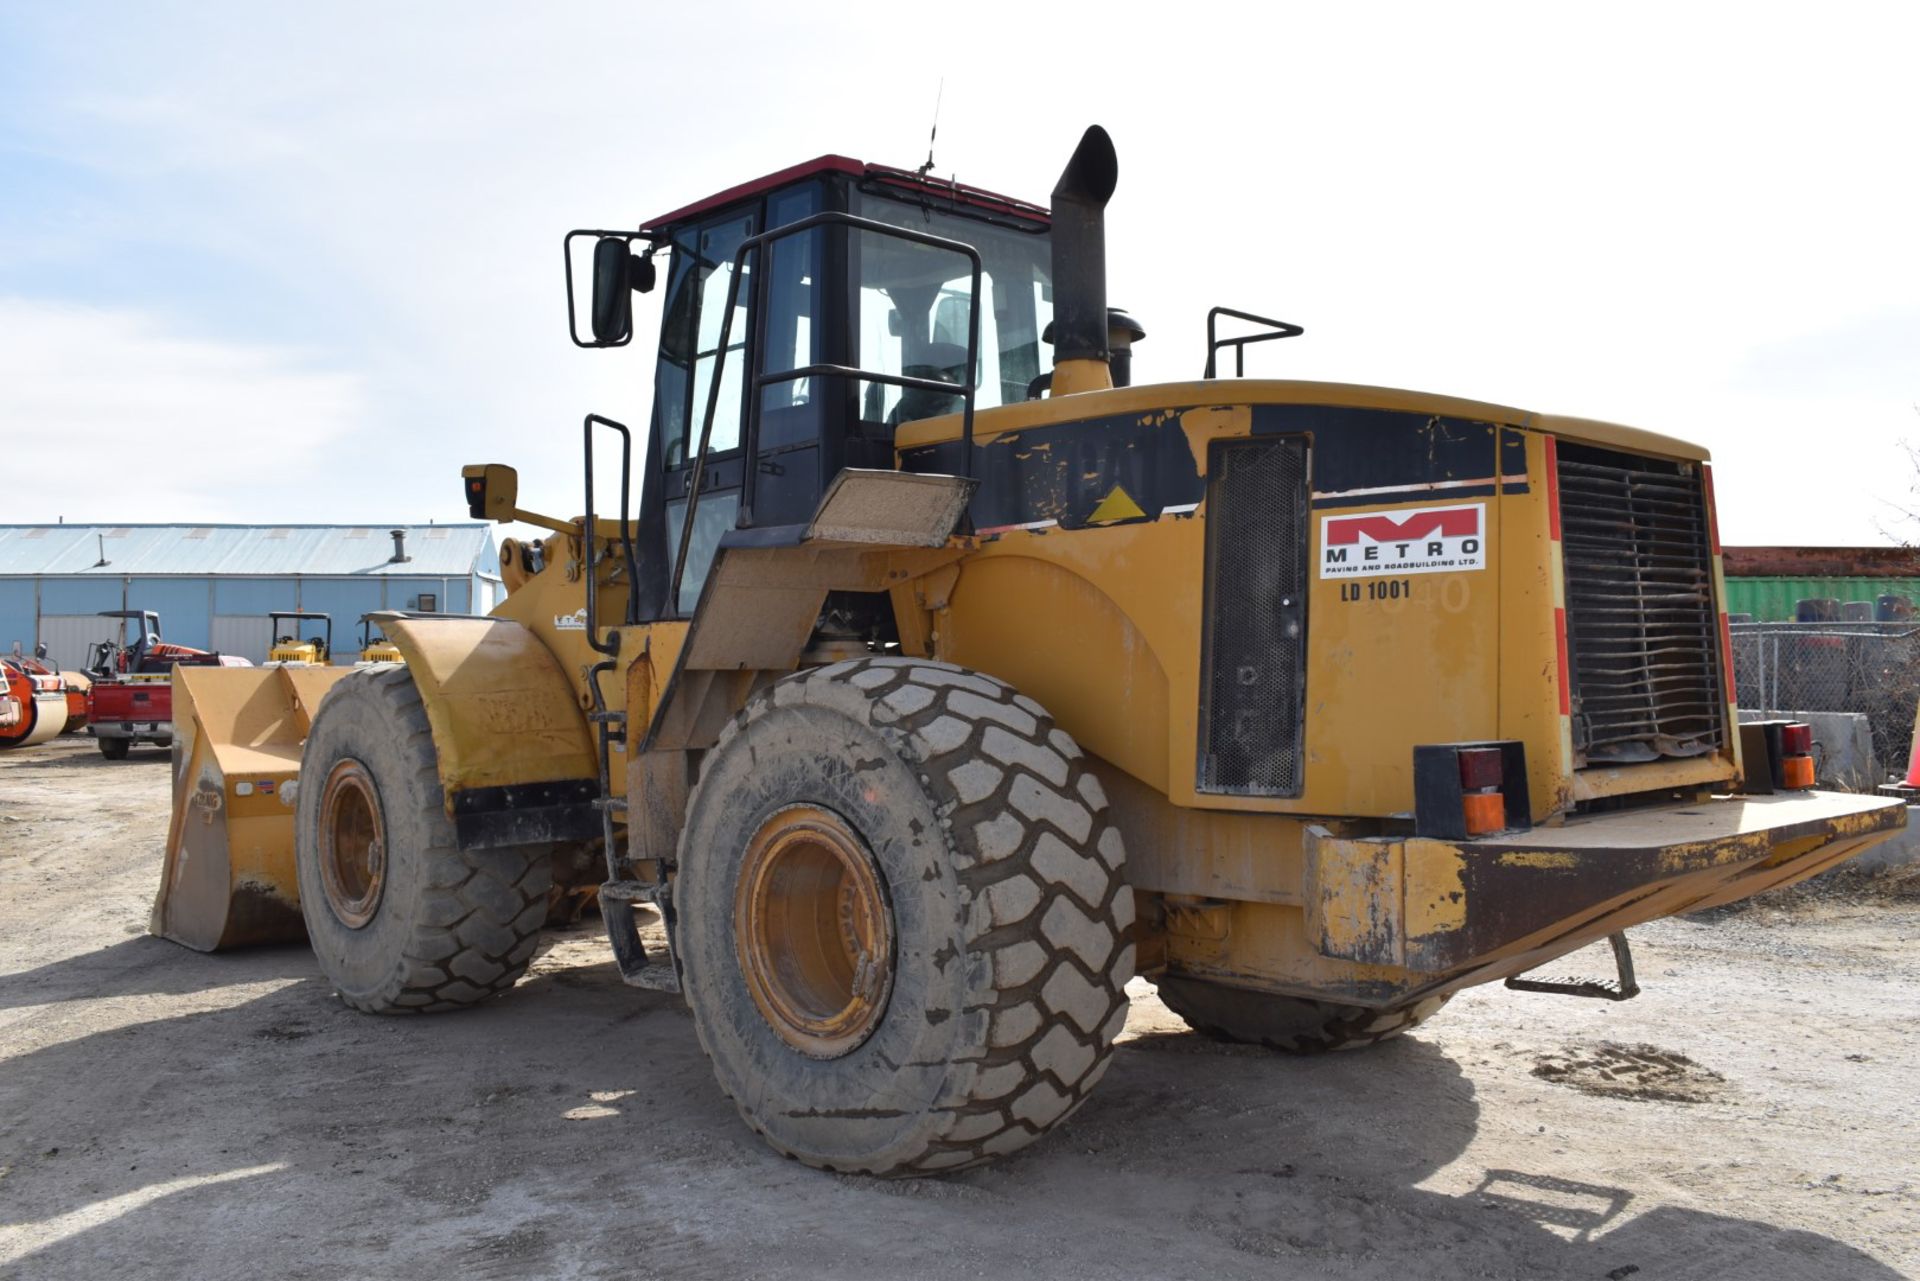 CATERPILLAR (1999) 966G ARTICULATING FRONT END WHEEL LOADER WITH BUCKET, APPROX. 16,425 HOURS ( - Image 5 of 20